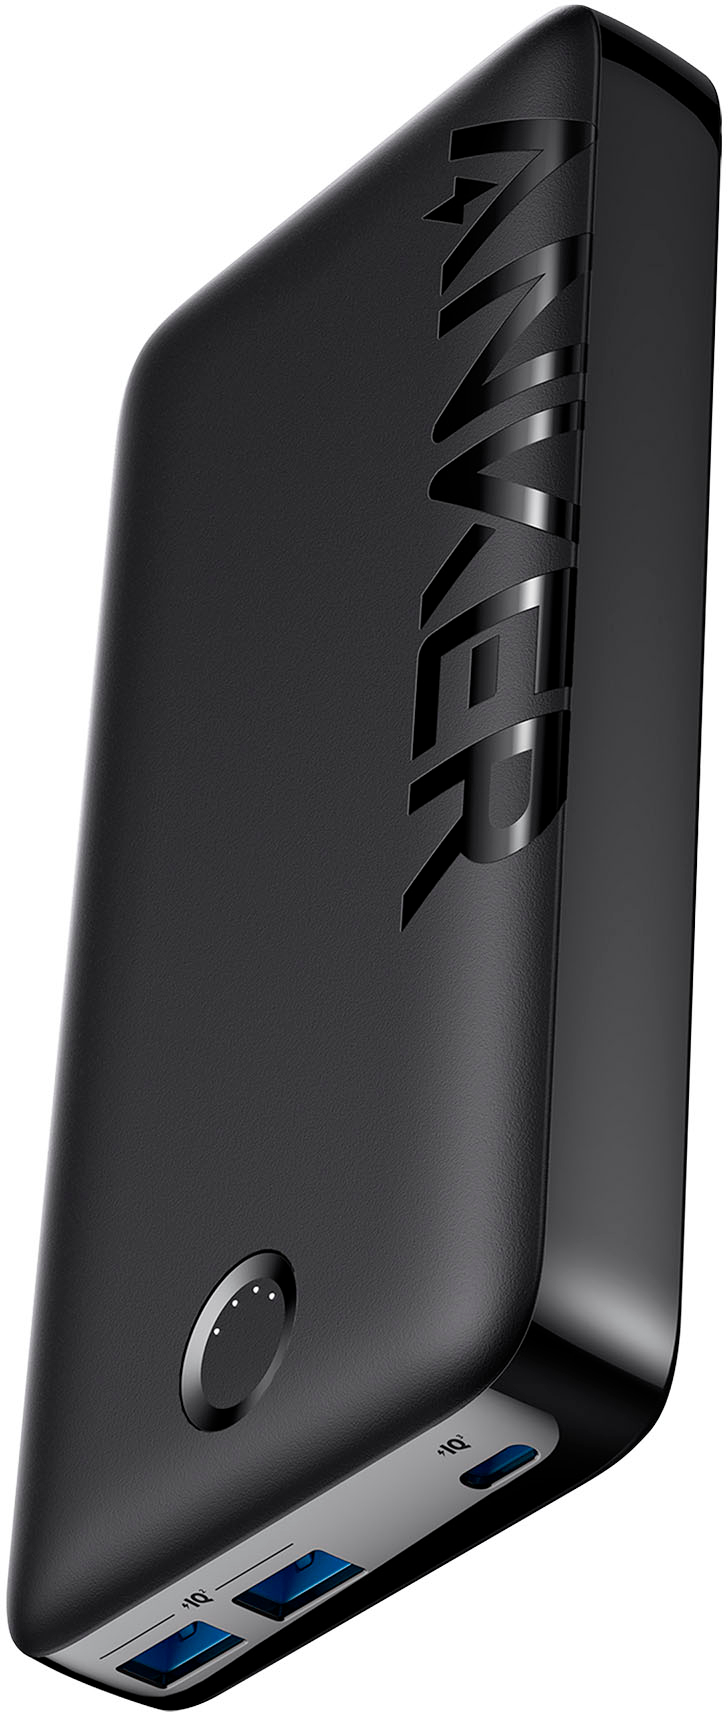 Insignia™ 20,000 mAh Portable Charger for Most USB-Enabled Devices NS-MB20K  - Best Buy